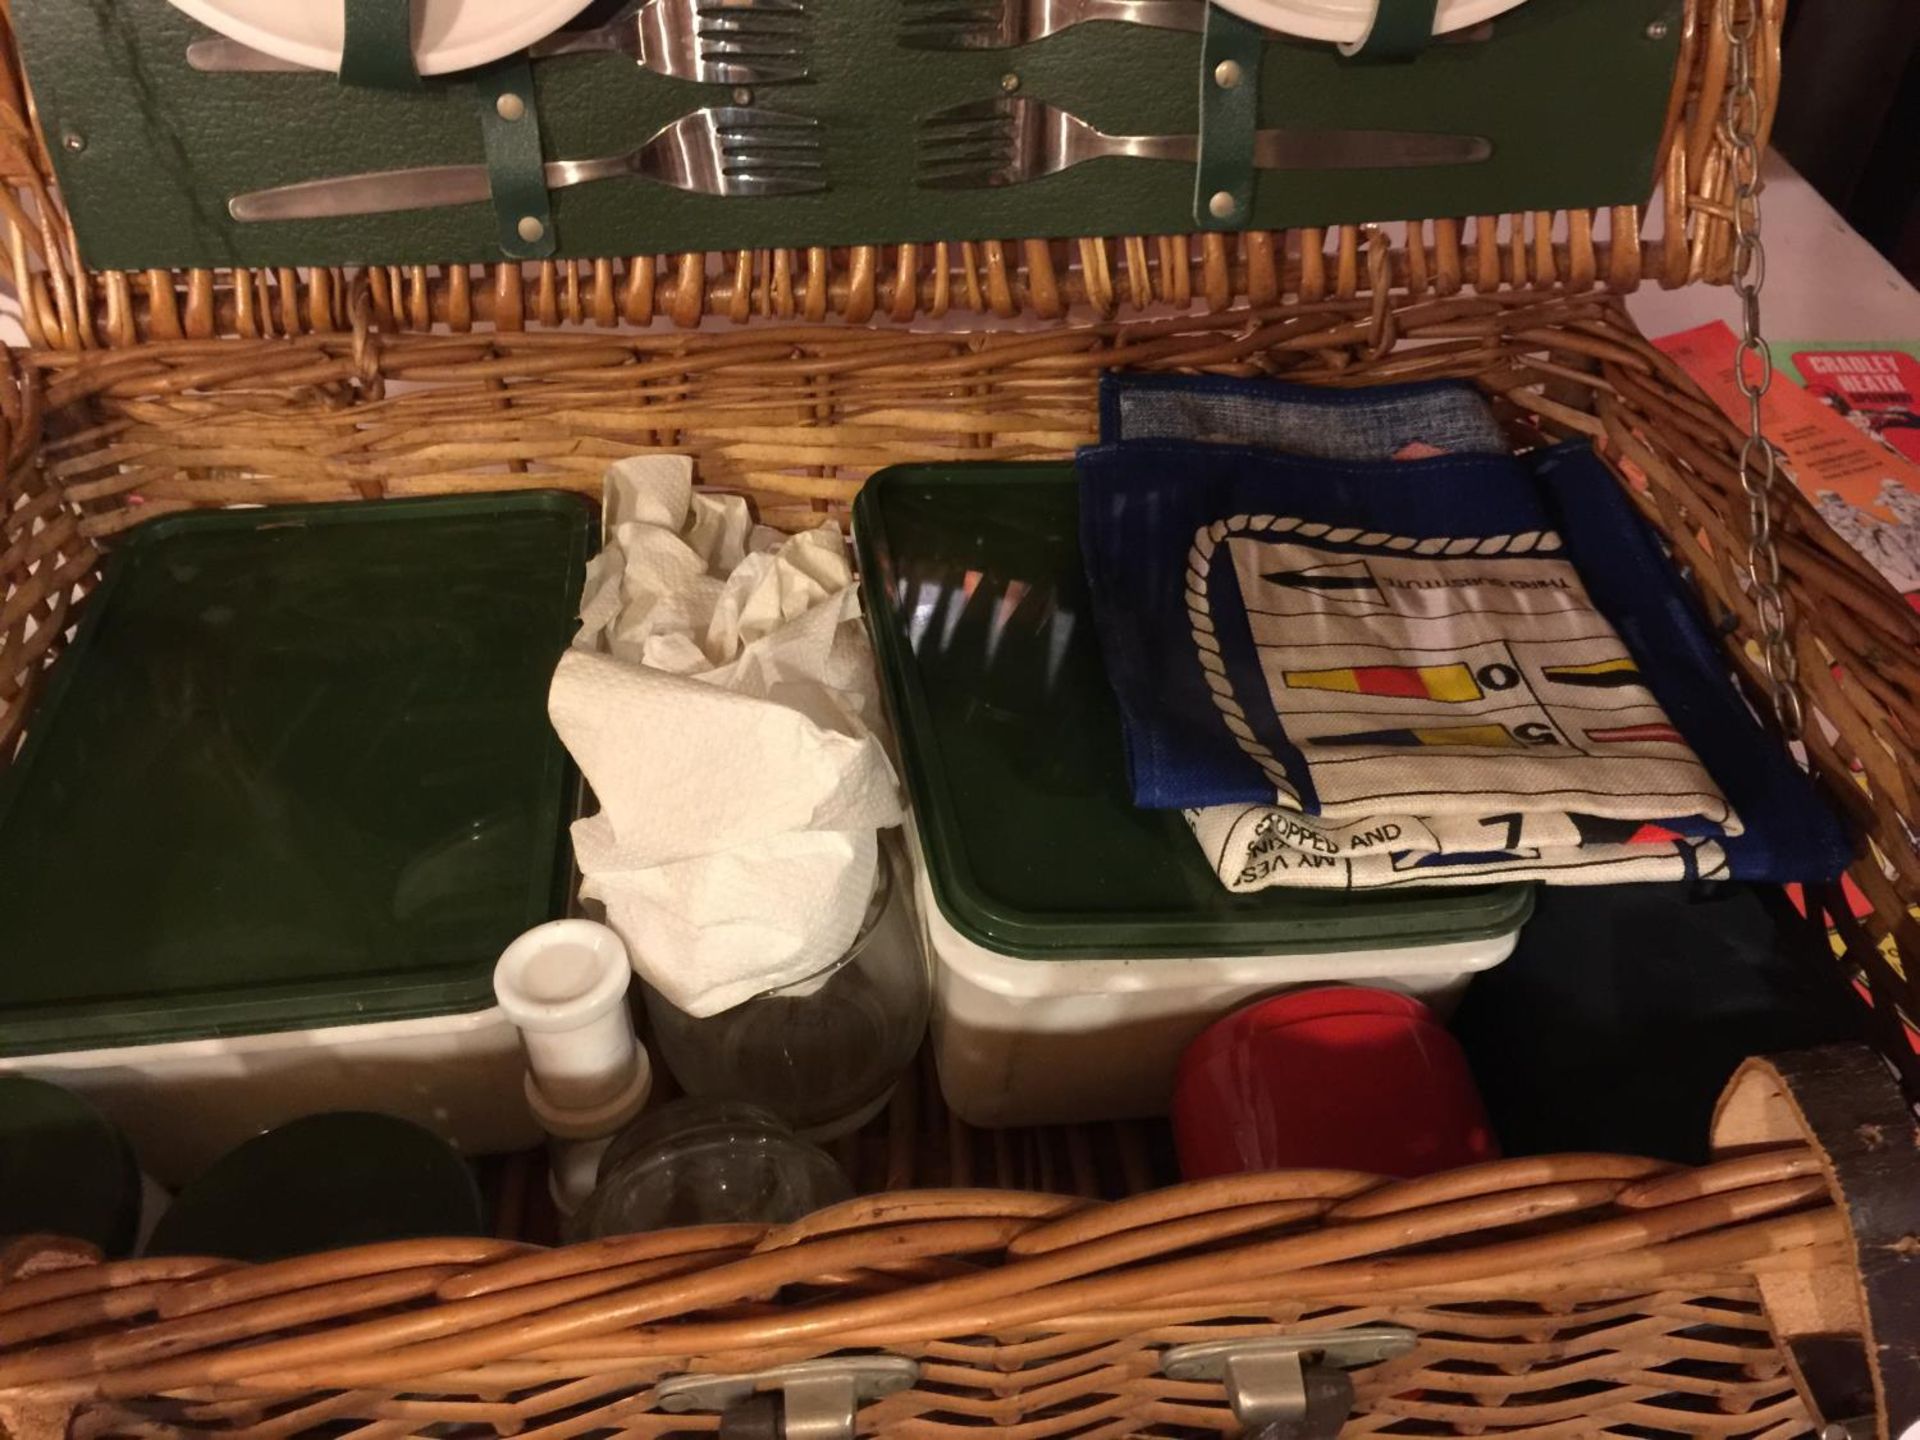 A WICKER PICNIC BASKET WITH CONTENTS - Image 3 of 3